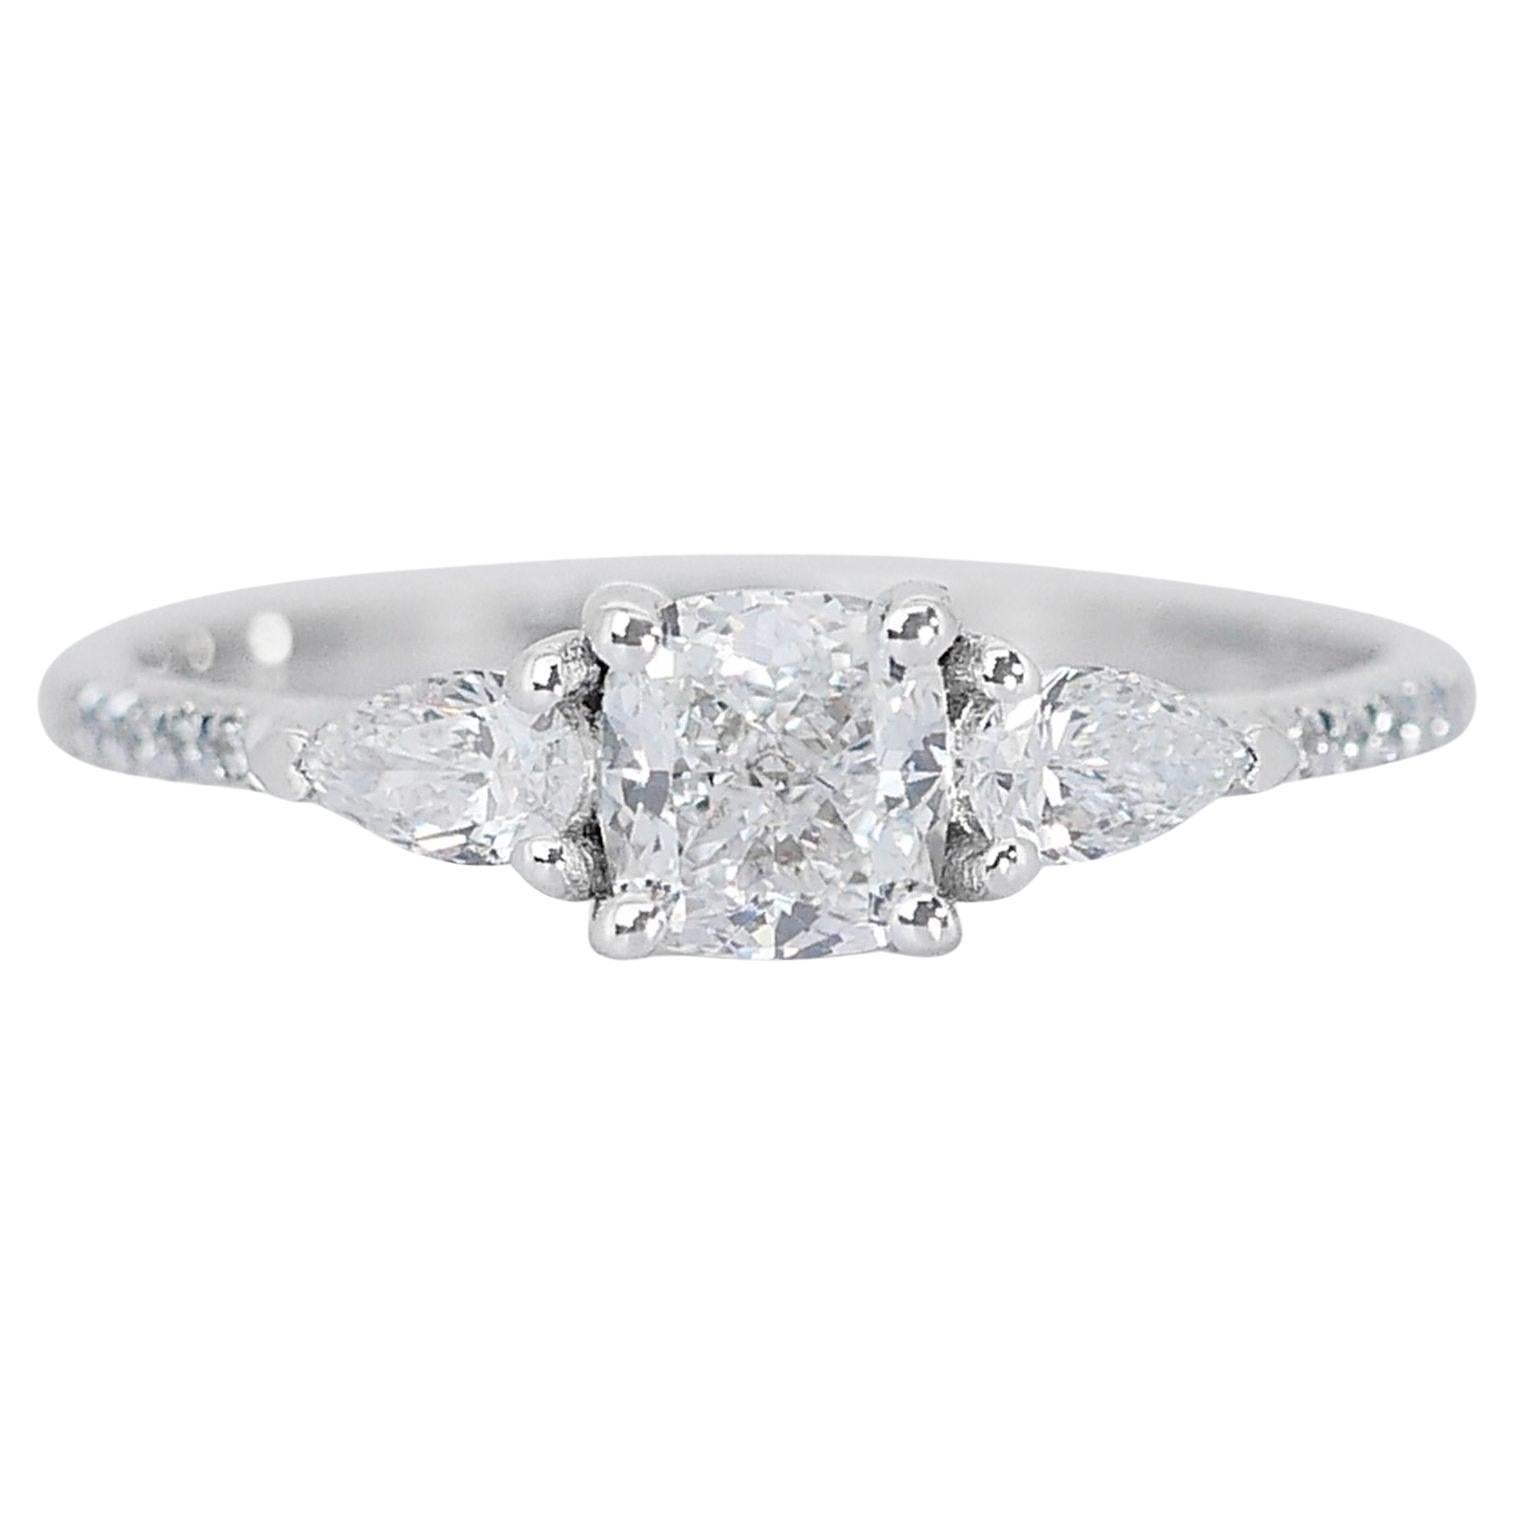 Captivating 0.73ct Diamond 3-Stone Ring in 18k White Gold - GIA Certified For Sale